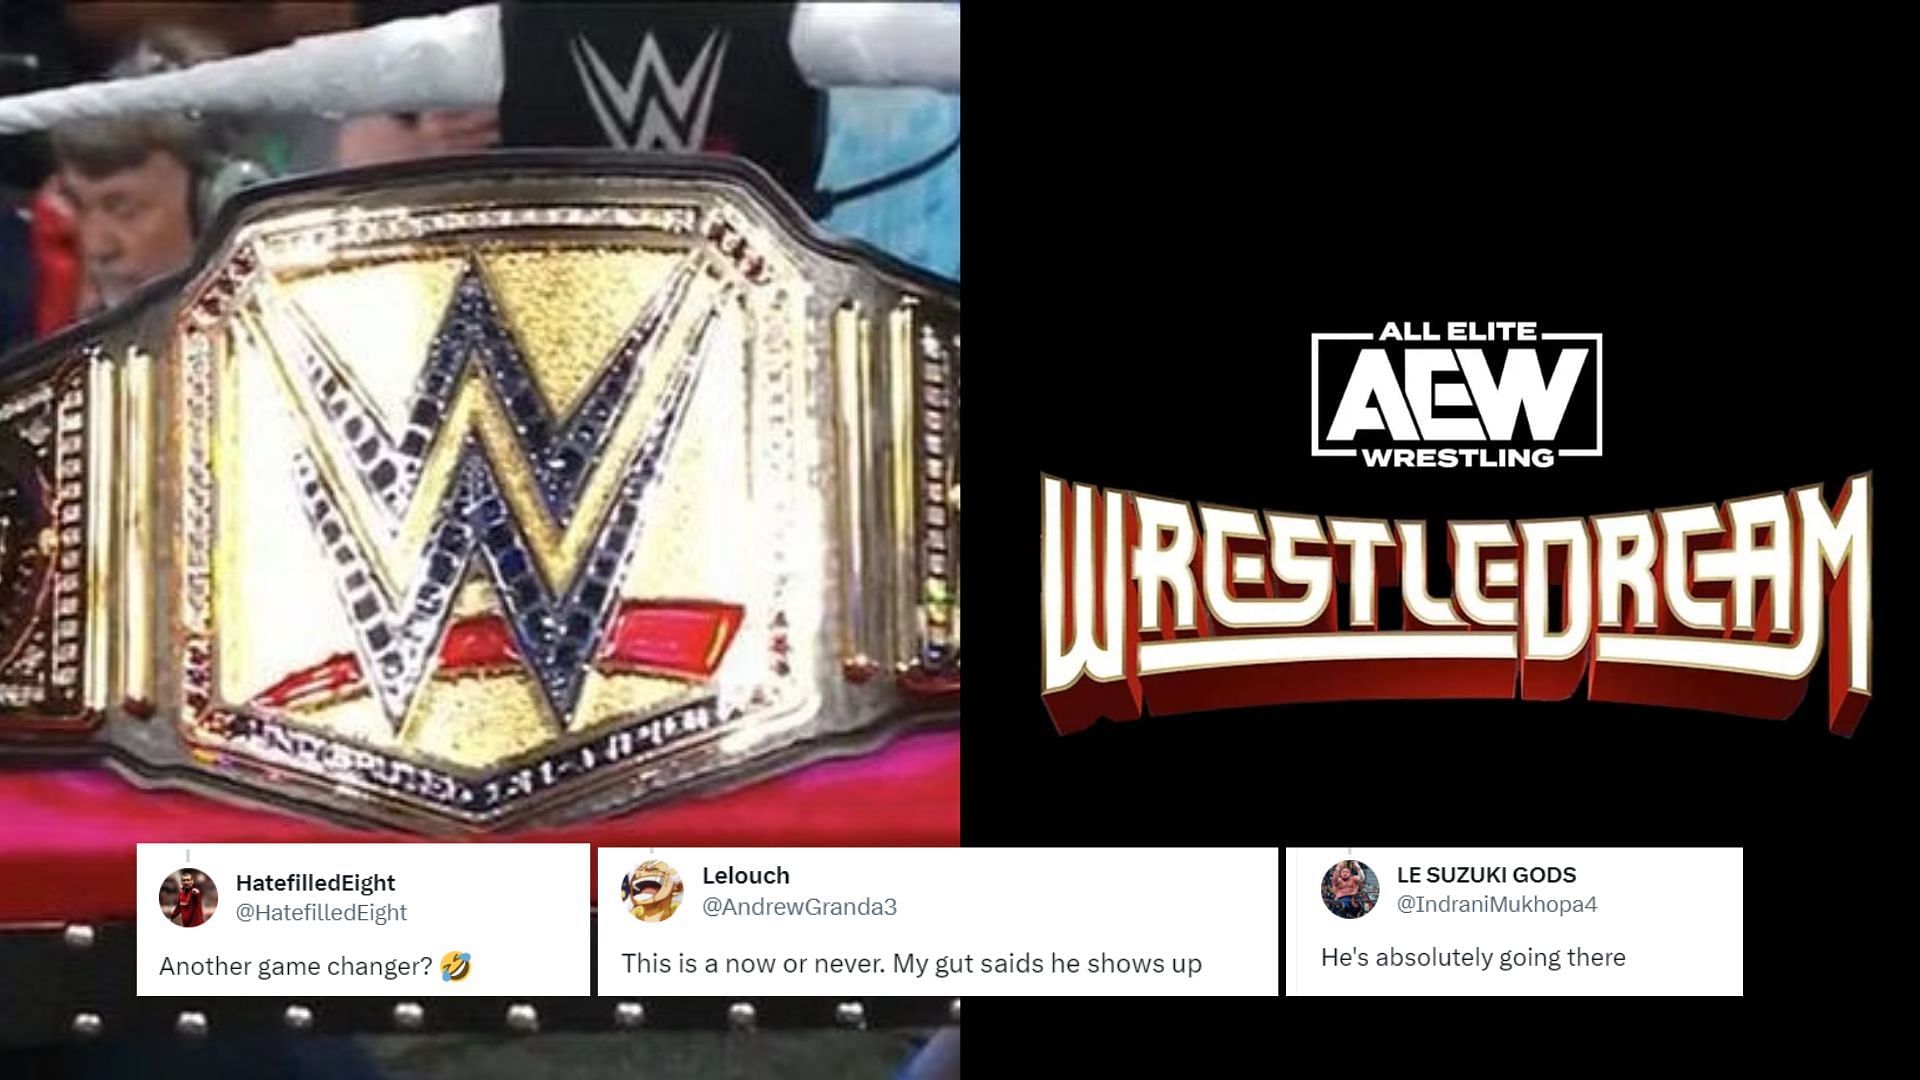 Former World Champion is heavily rumored to debut at AEW WrestleDream